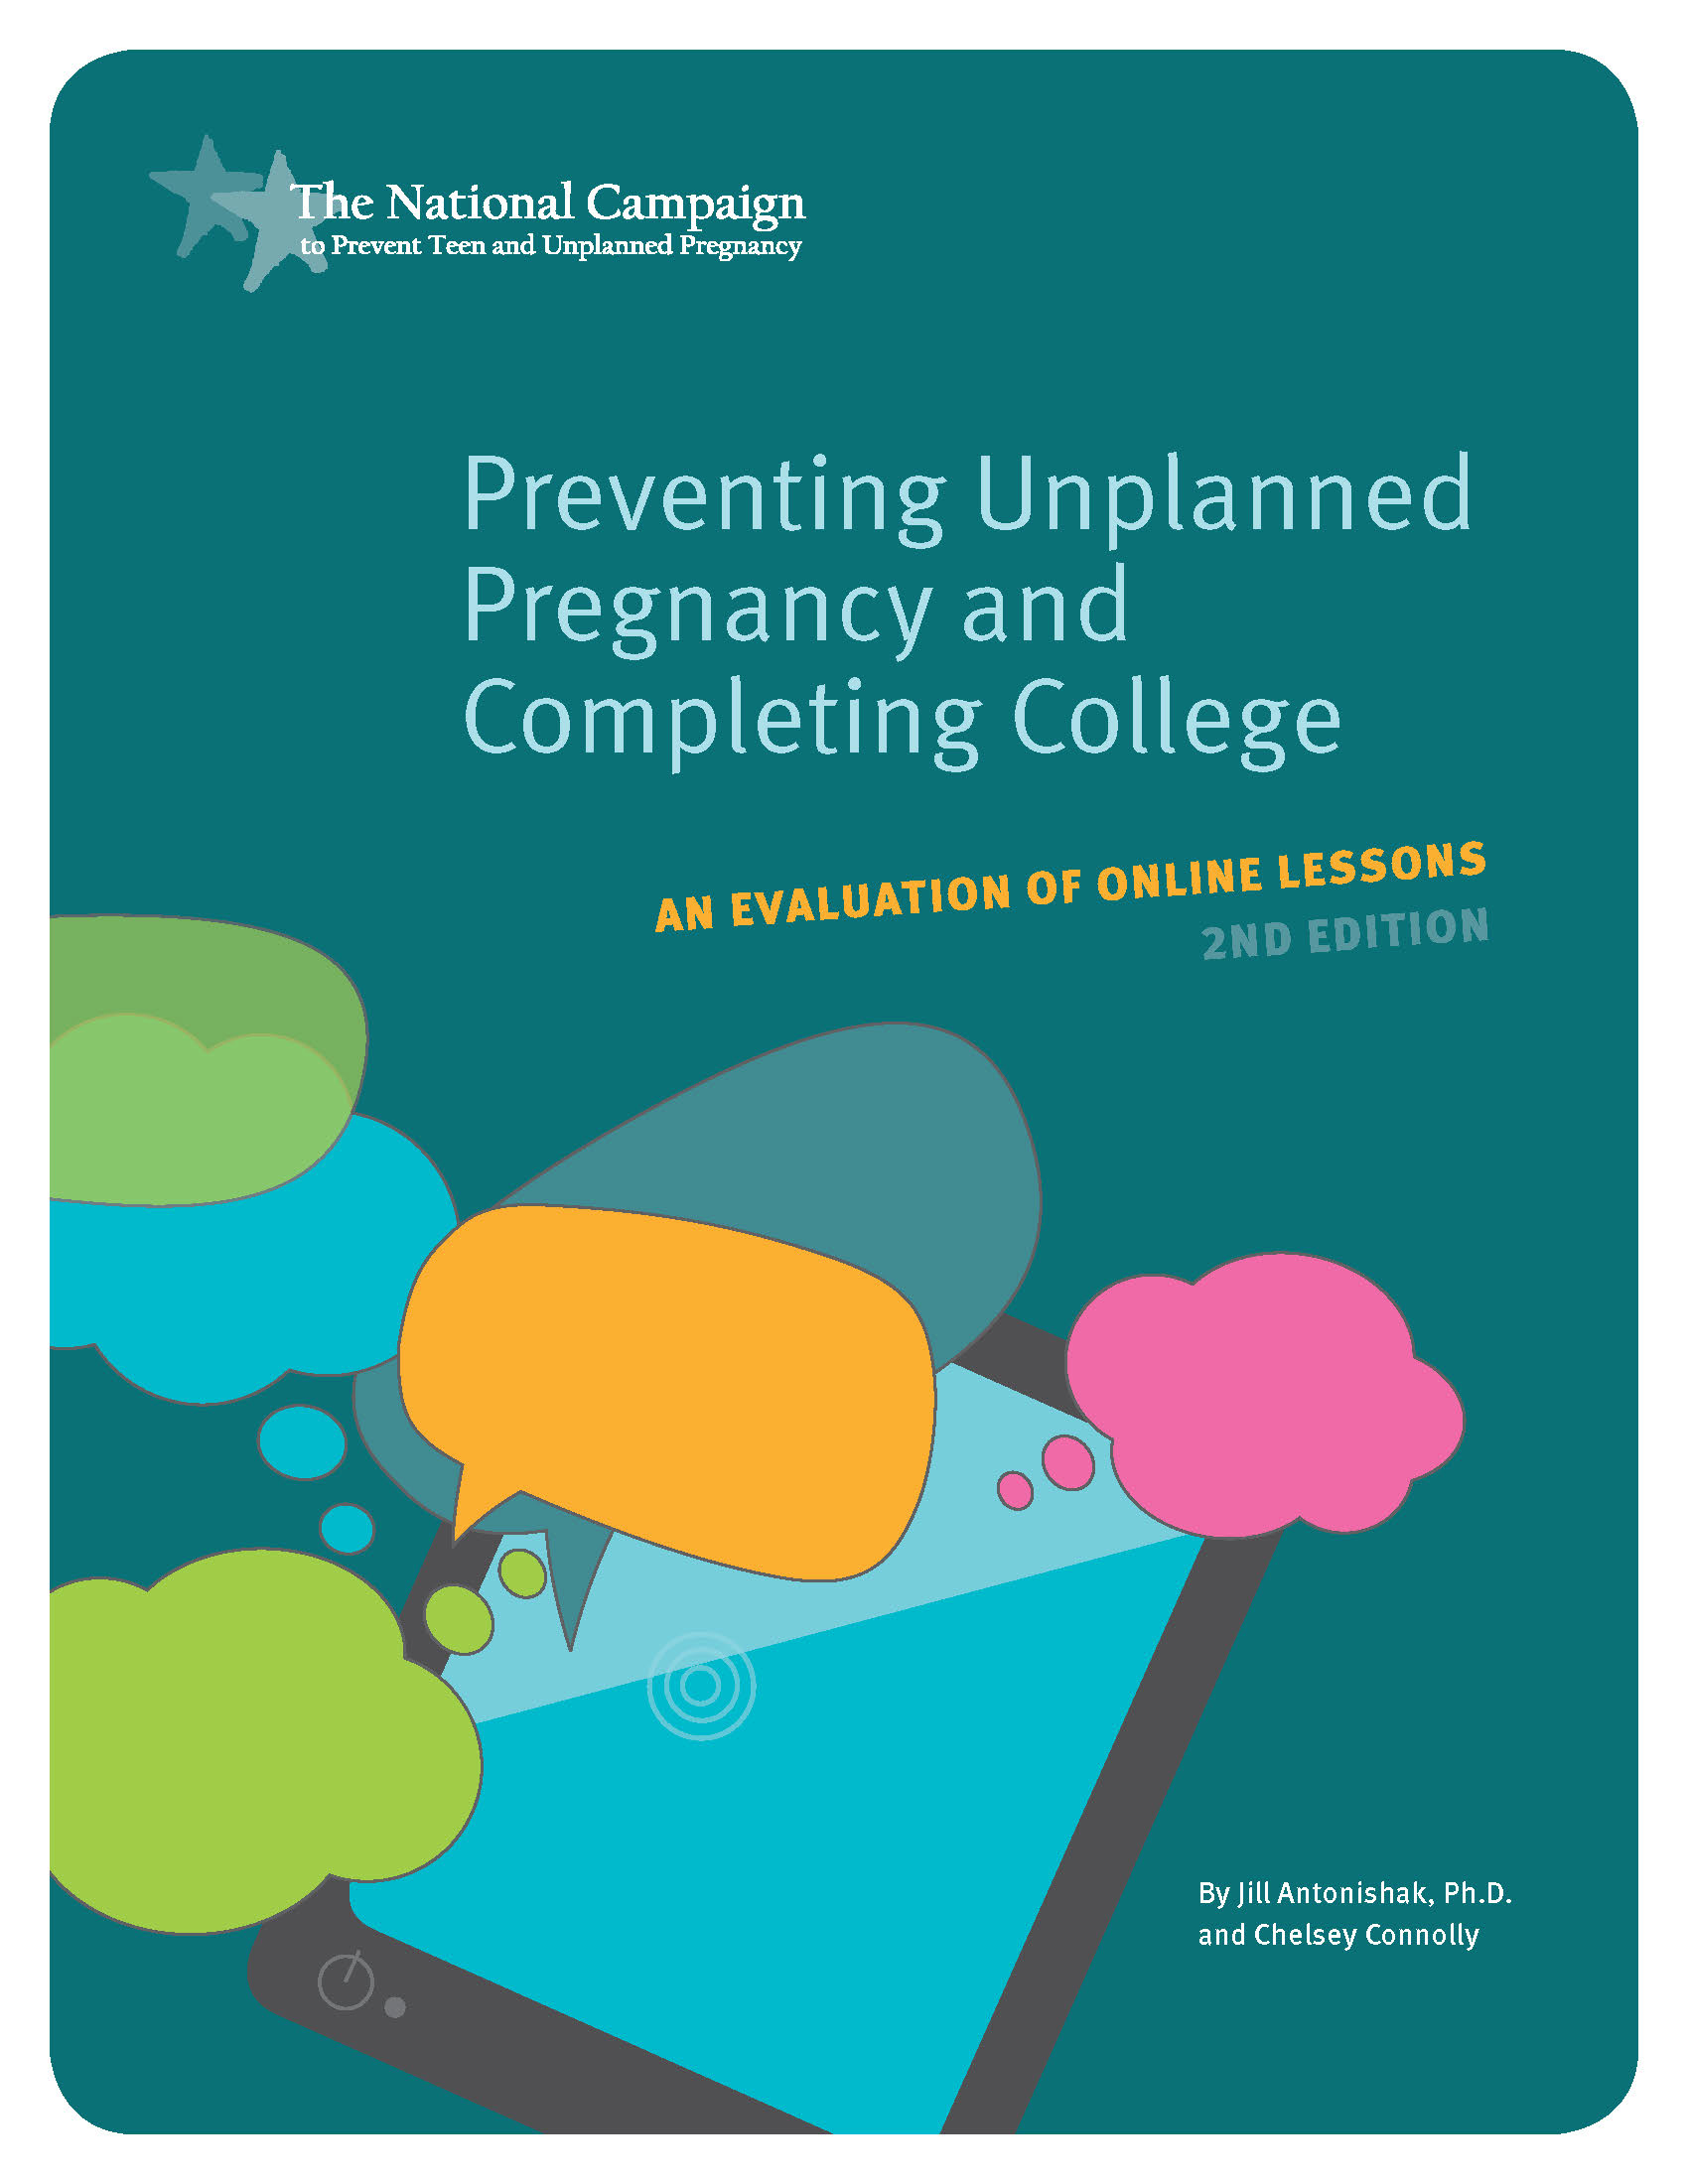 Preventing Unplanned Pregnancy and Completing College: An Evaluation of Online Lessons, 2nd Edition